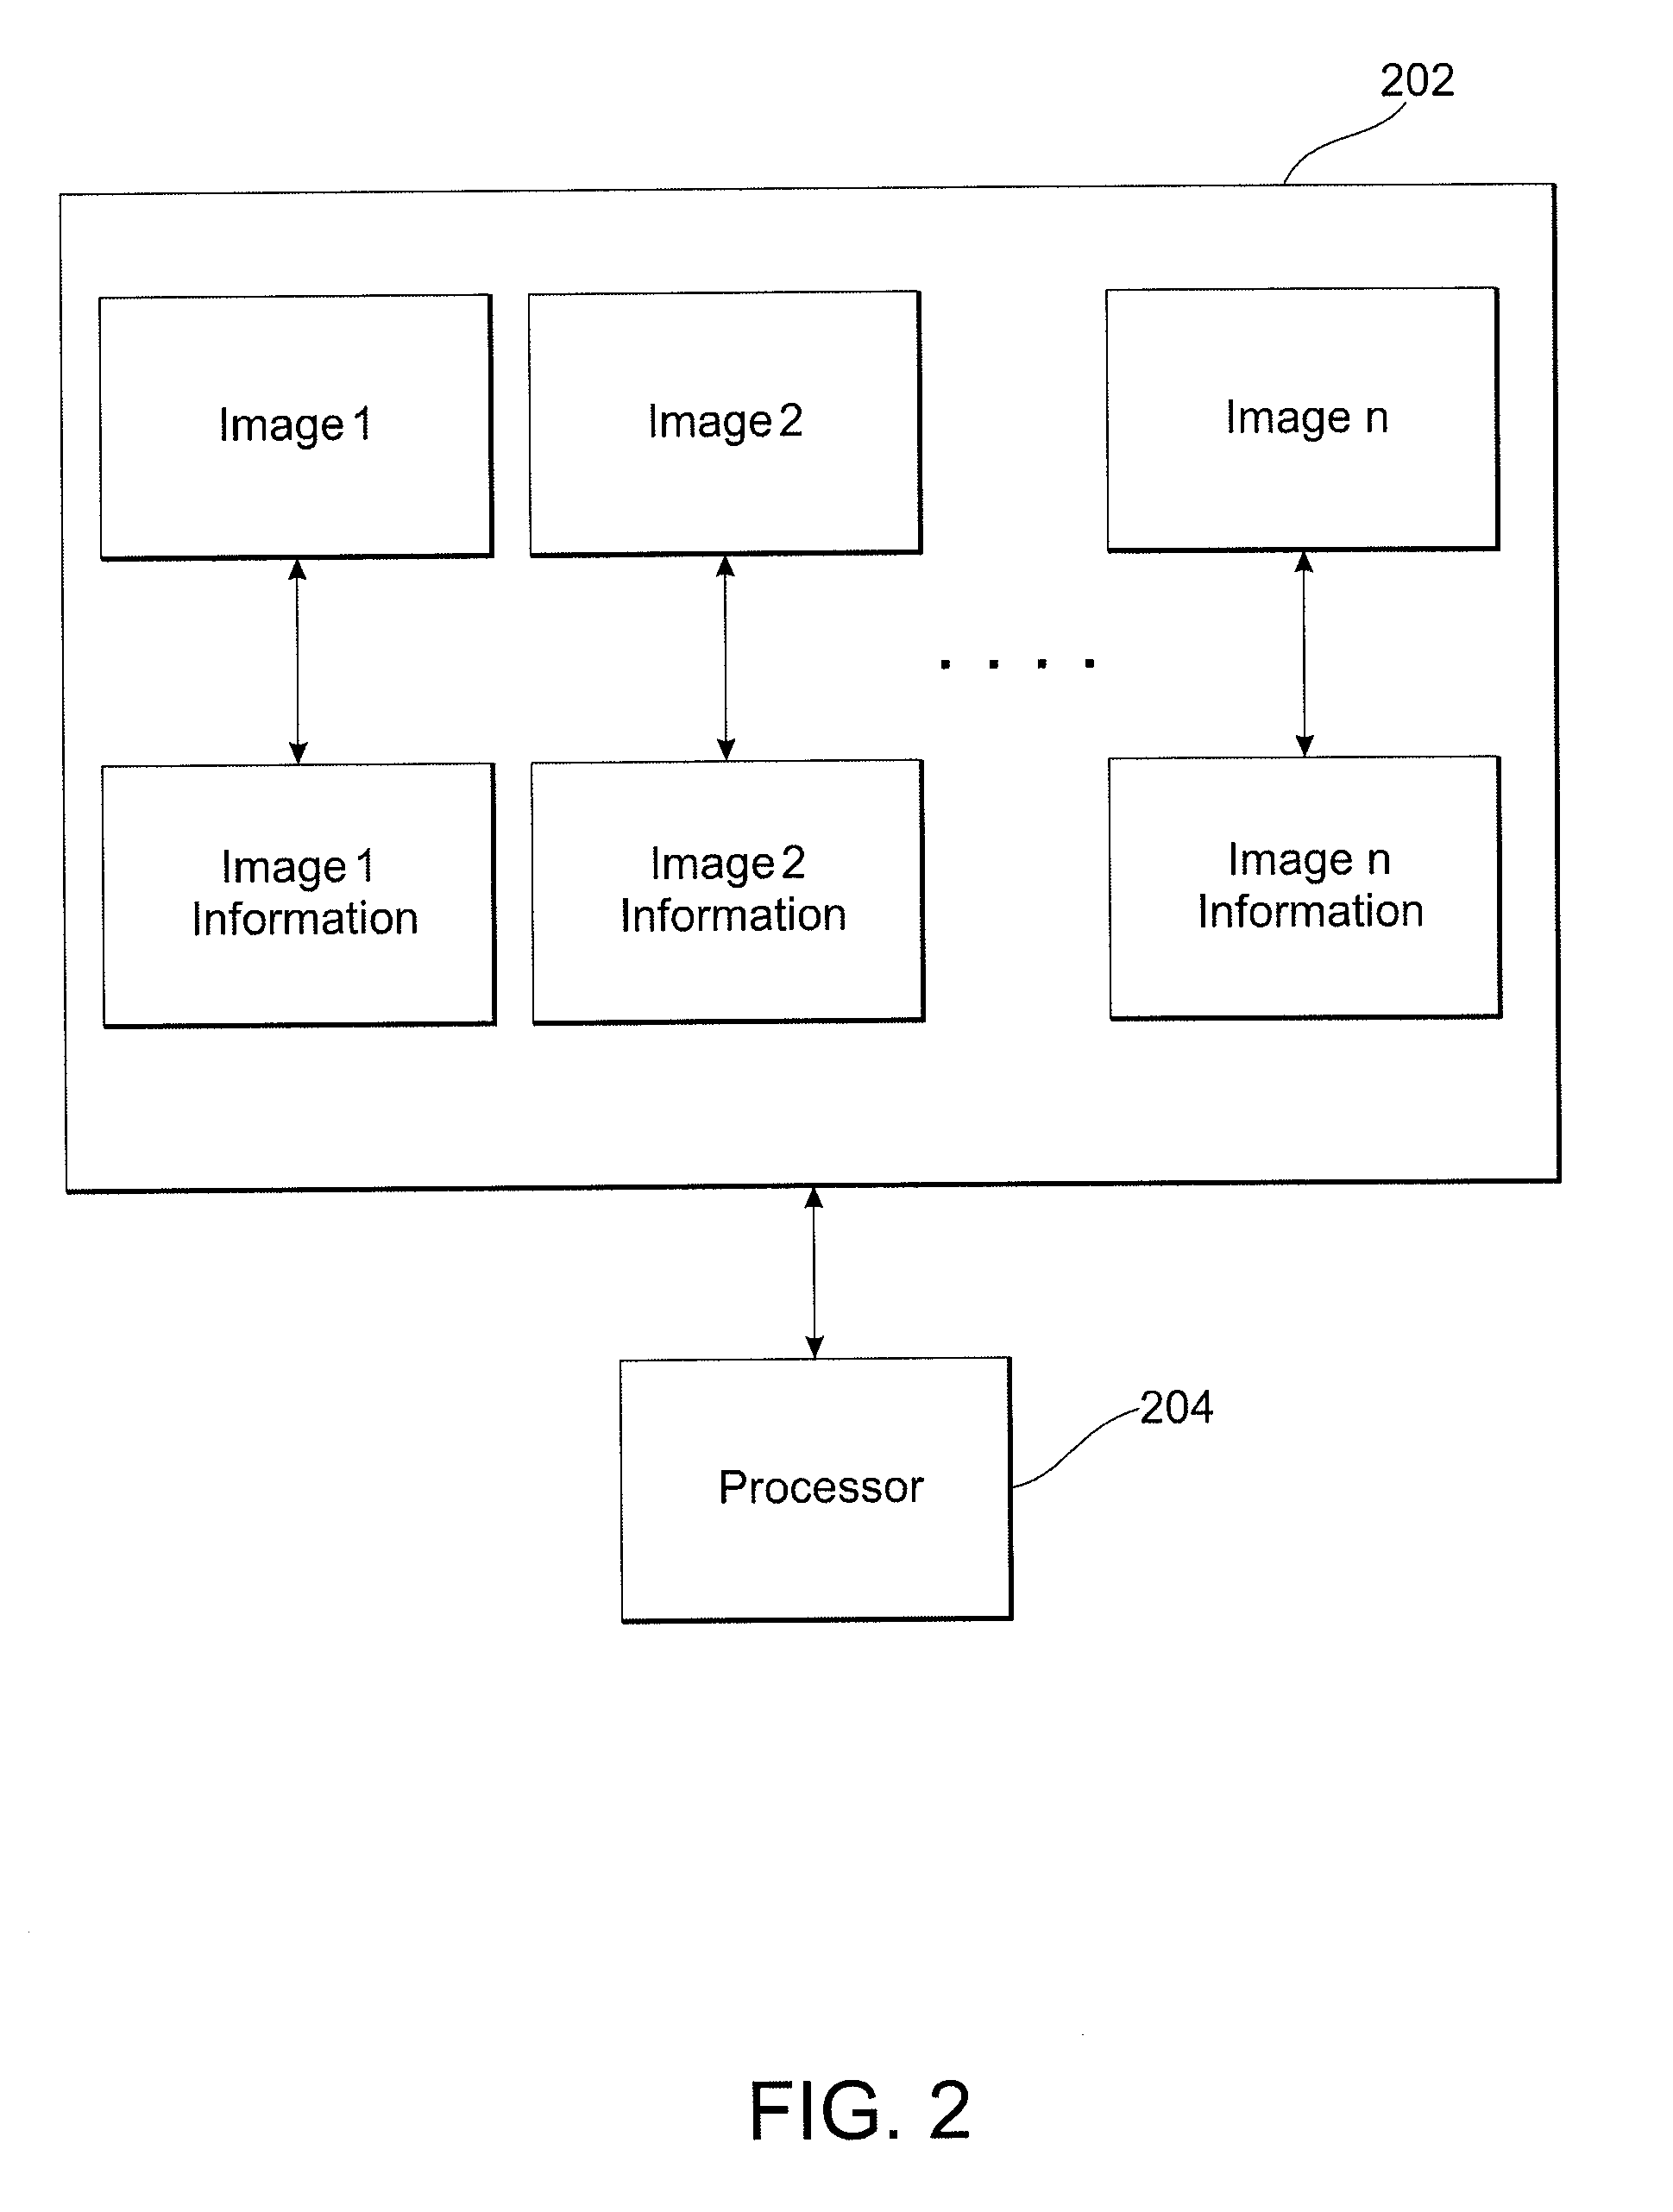 System, Method, And Computer Program Product For Evaluating Photographic Performance